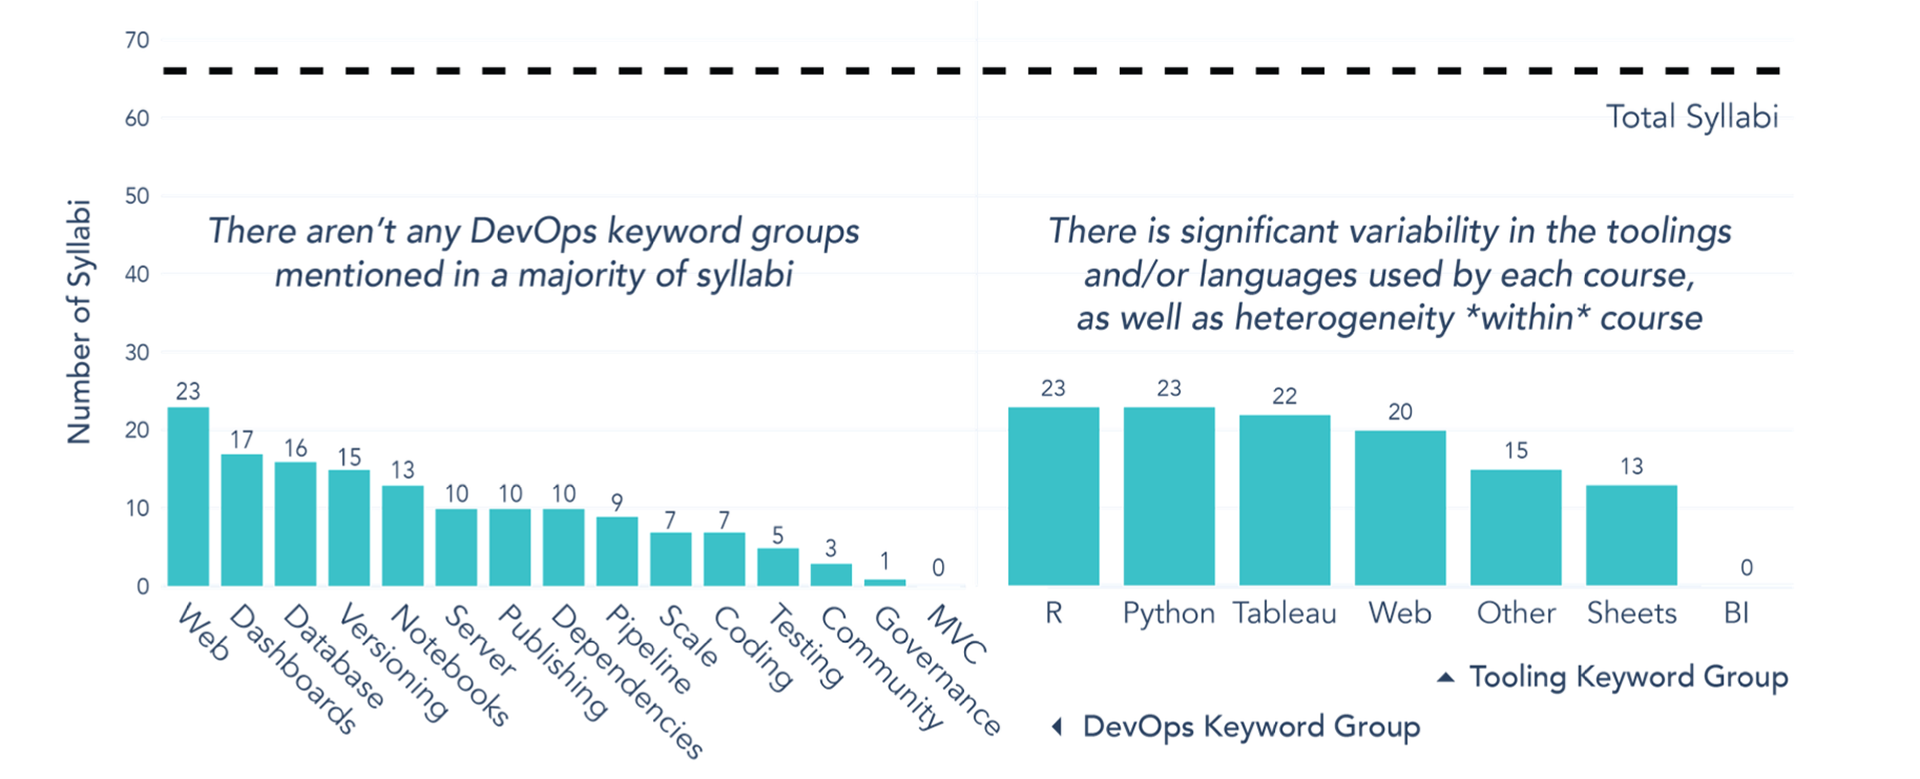 Left: bar chart showing mentions of devops keywords, with no keyword groups represented in a majority of syllabi. Right: bar chart showing nearly a five-way tie in languages / toolings mentioned in syllabi between R, Python, Tableau, Excel, and web tools like d3.